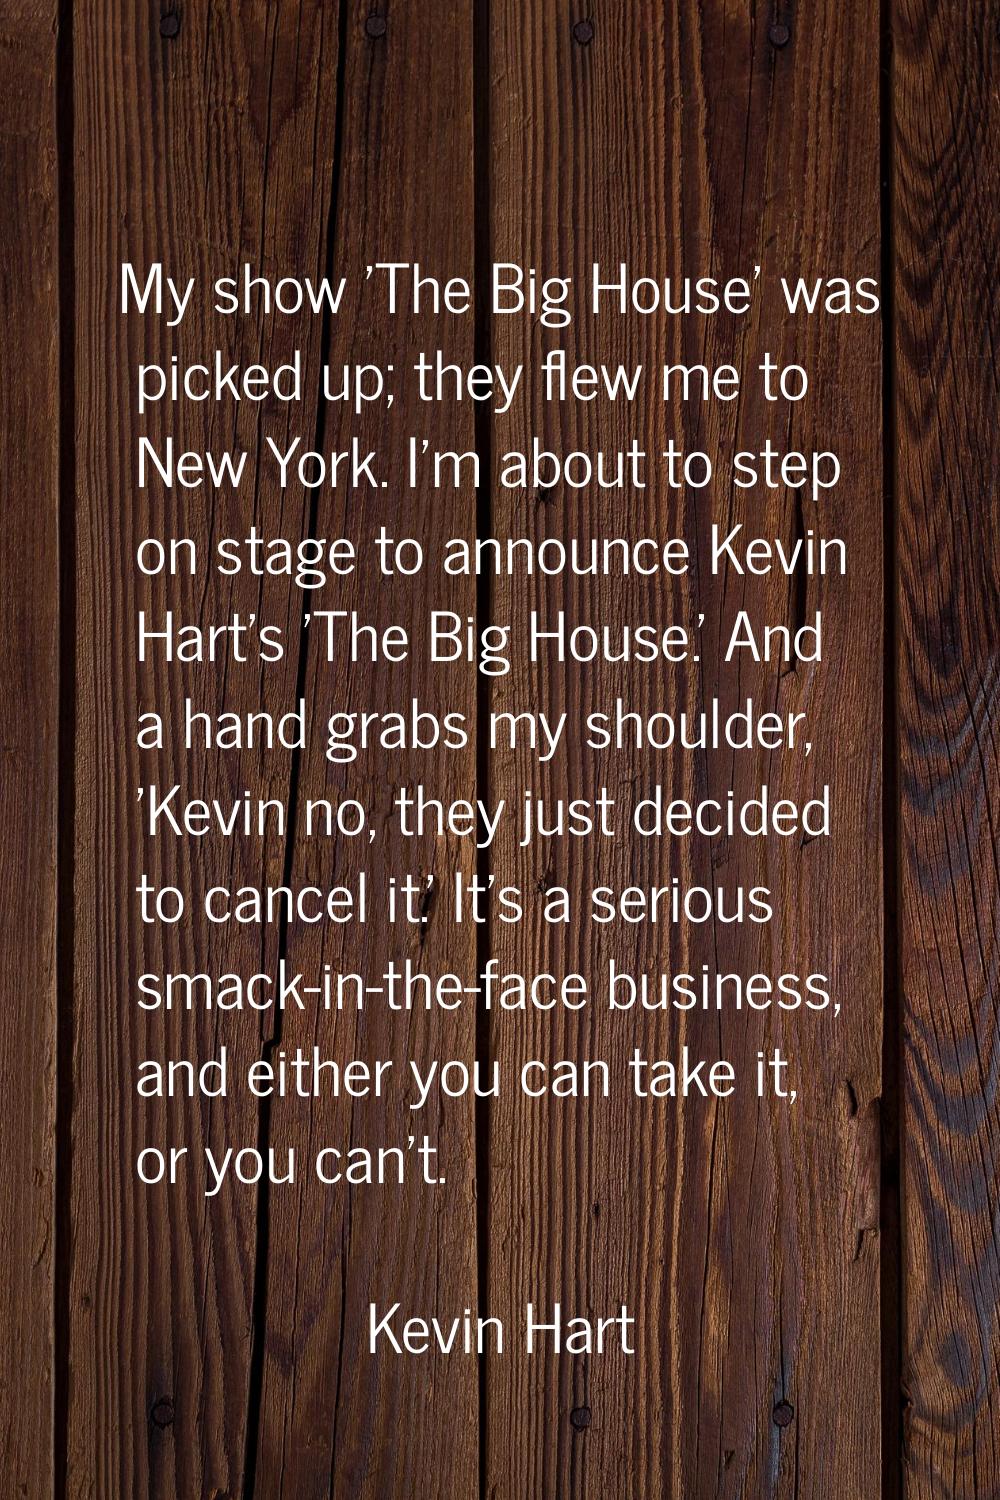 My show 'The Big House' was picked up; they flew me to New York. I'm about to step on stage to anno